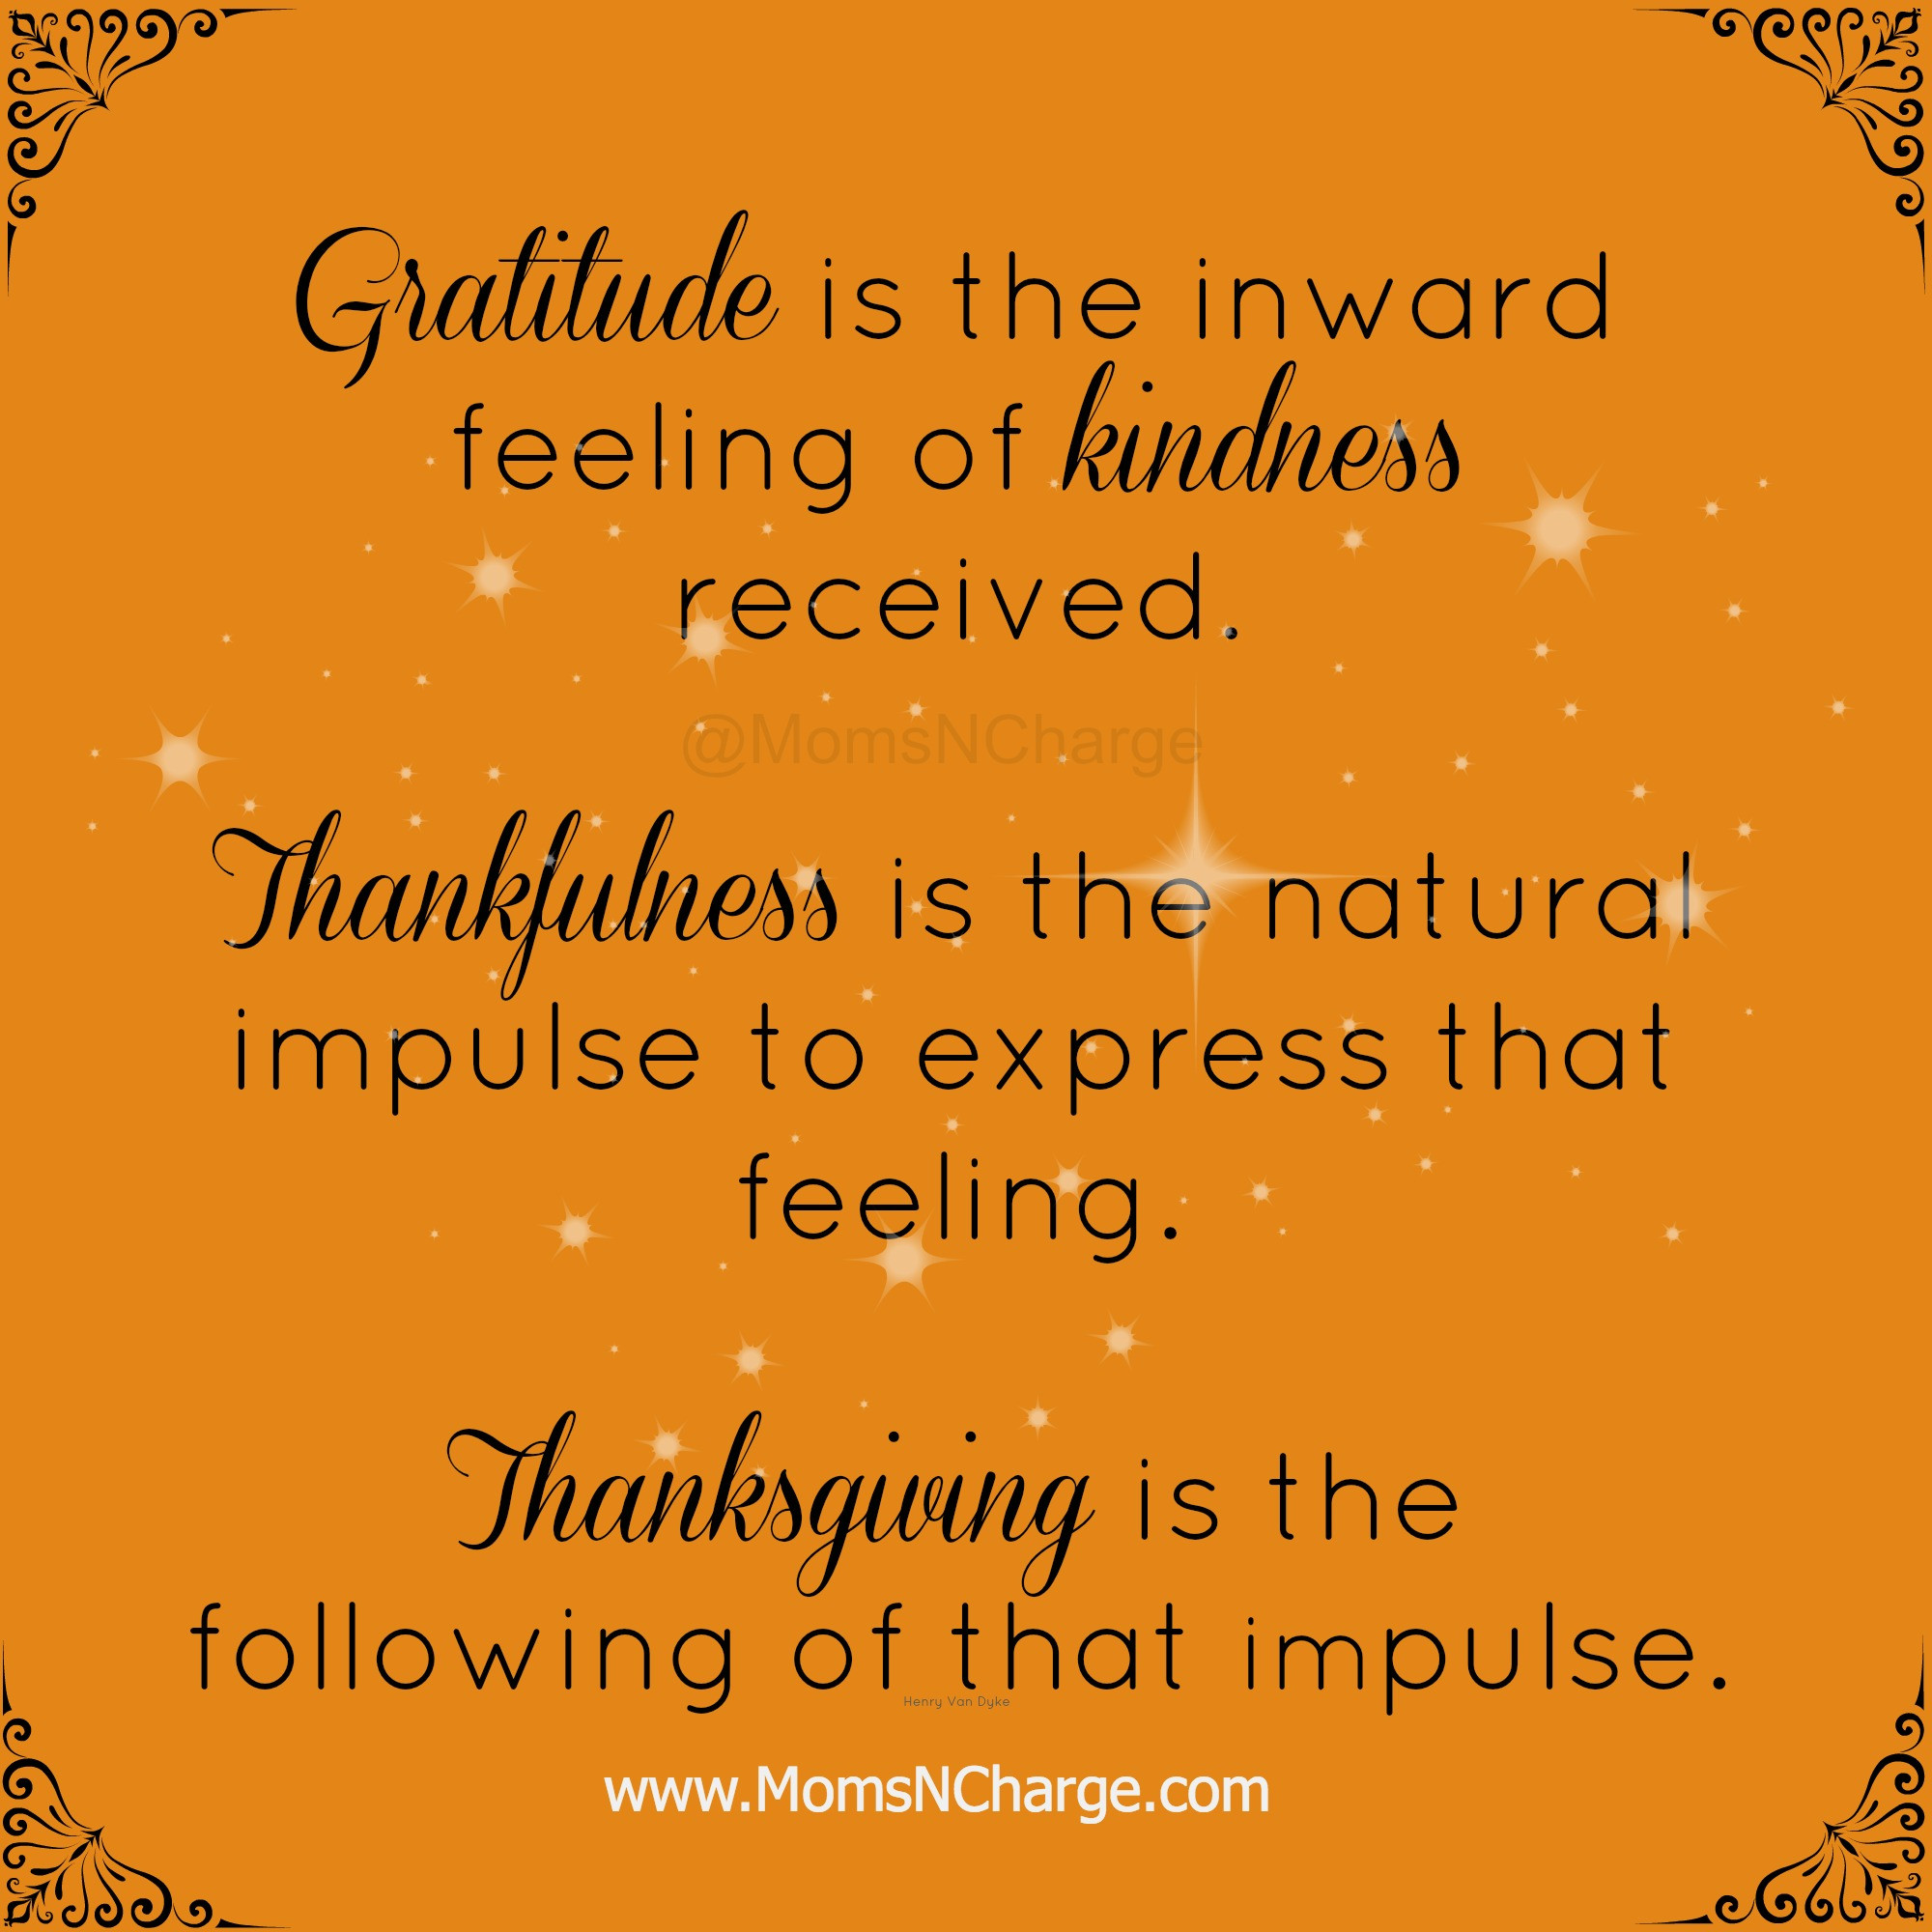 Quotes On Thanksgiving And Gratitude
 Gratitude Quotes Thanksgiving Day QuotesGram